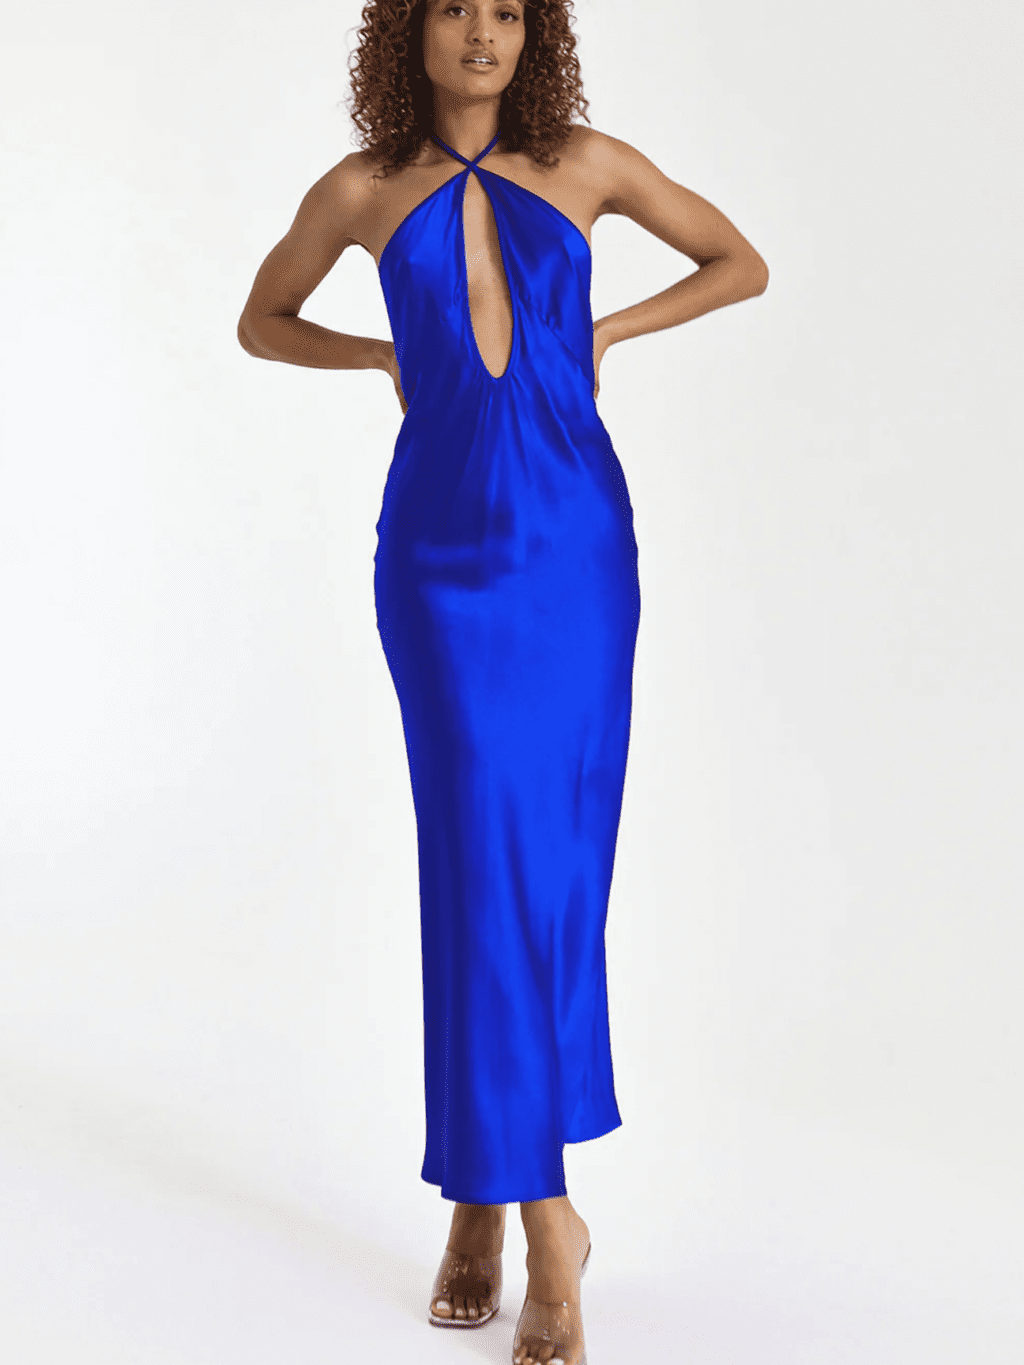 Natalie Rolt Irena Midi Dress. Blue silk midi dress for rent with keyhole cut out.